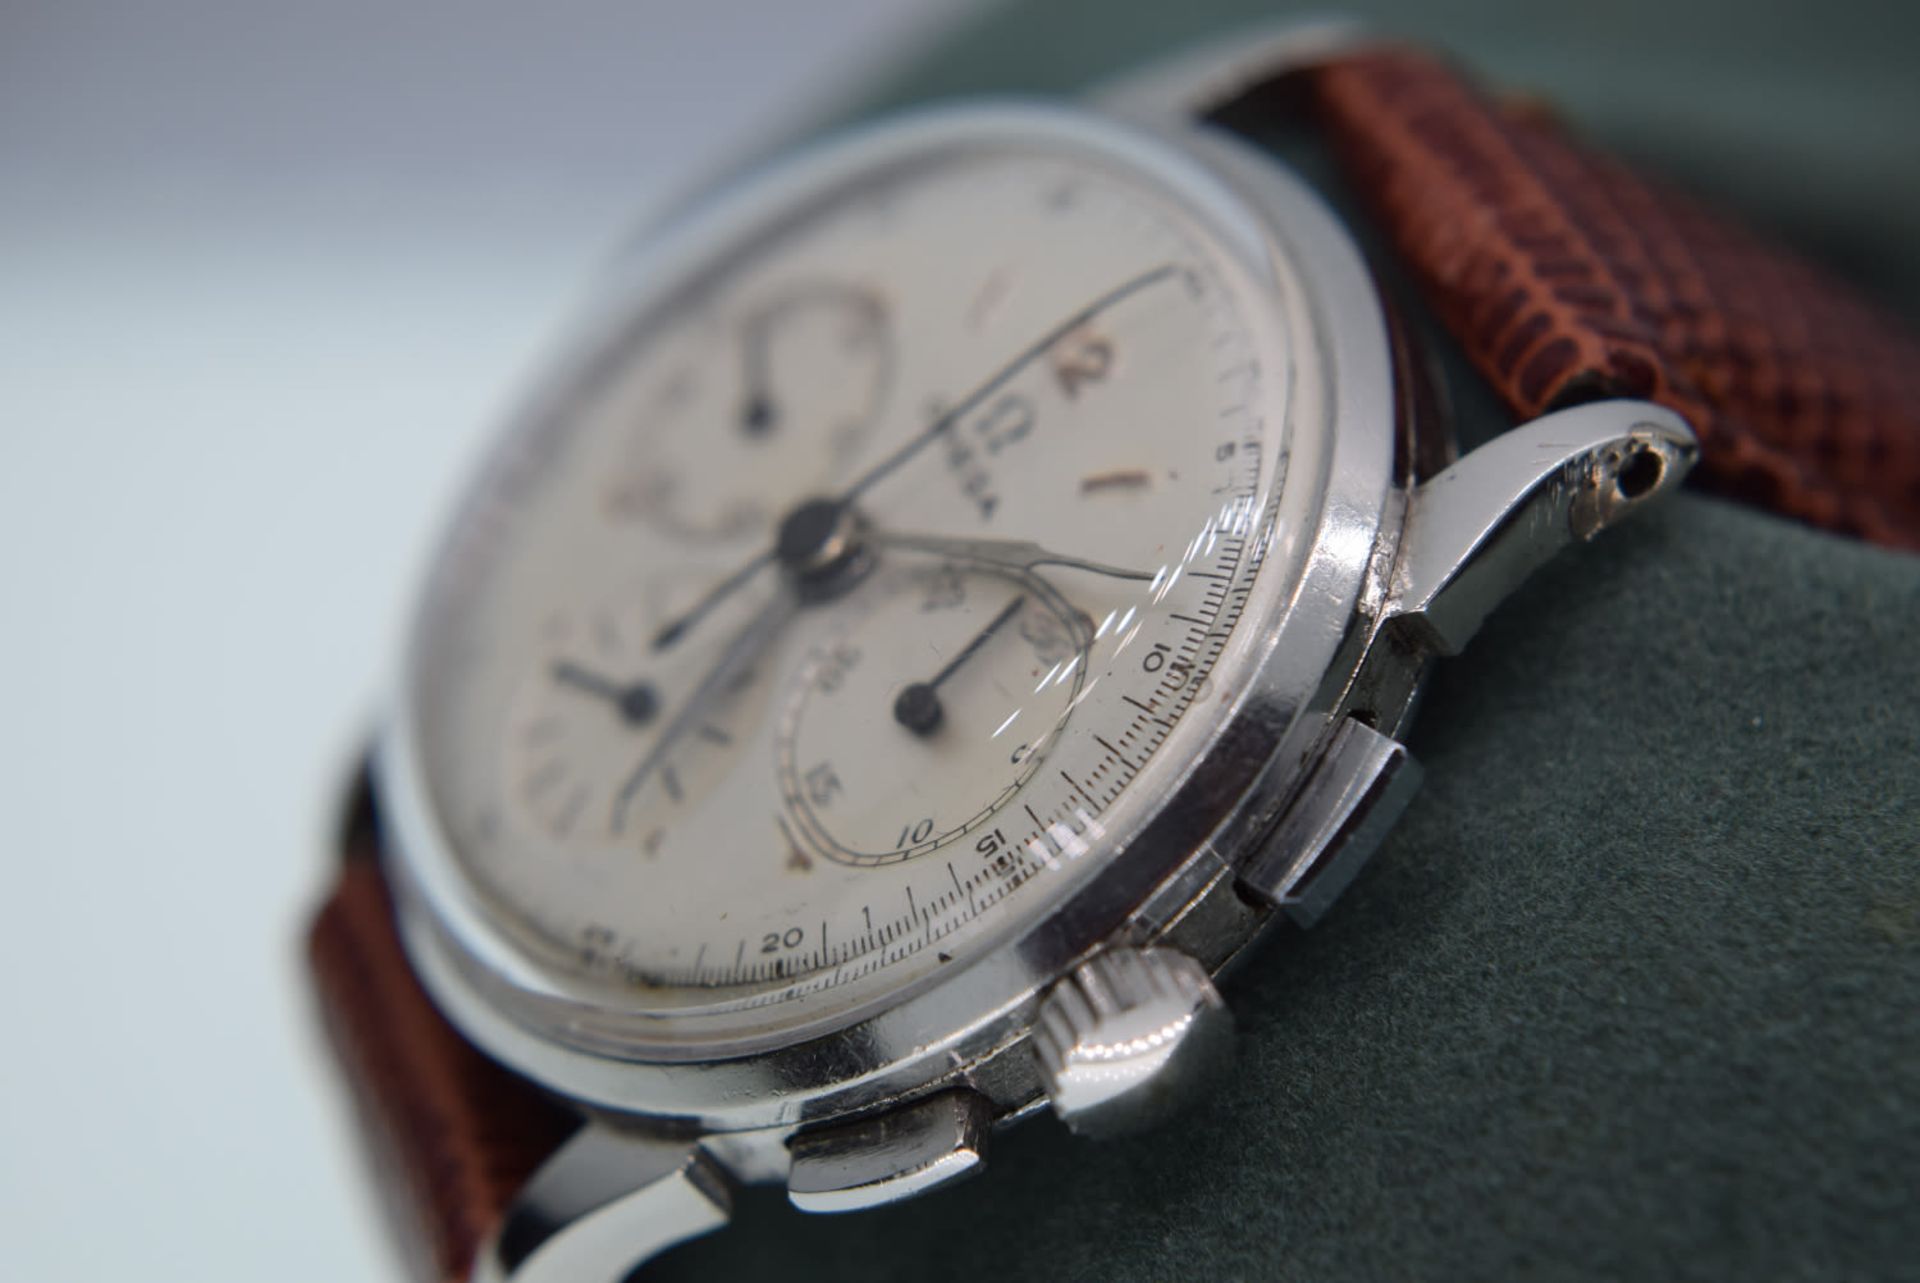 VINTAGE OMEGA WATCH WITH CHRONOGRAPH WITH OMEGA MANUAL WIND MOVEMENT - Image 4 of 5